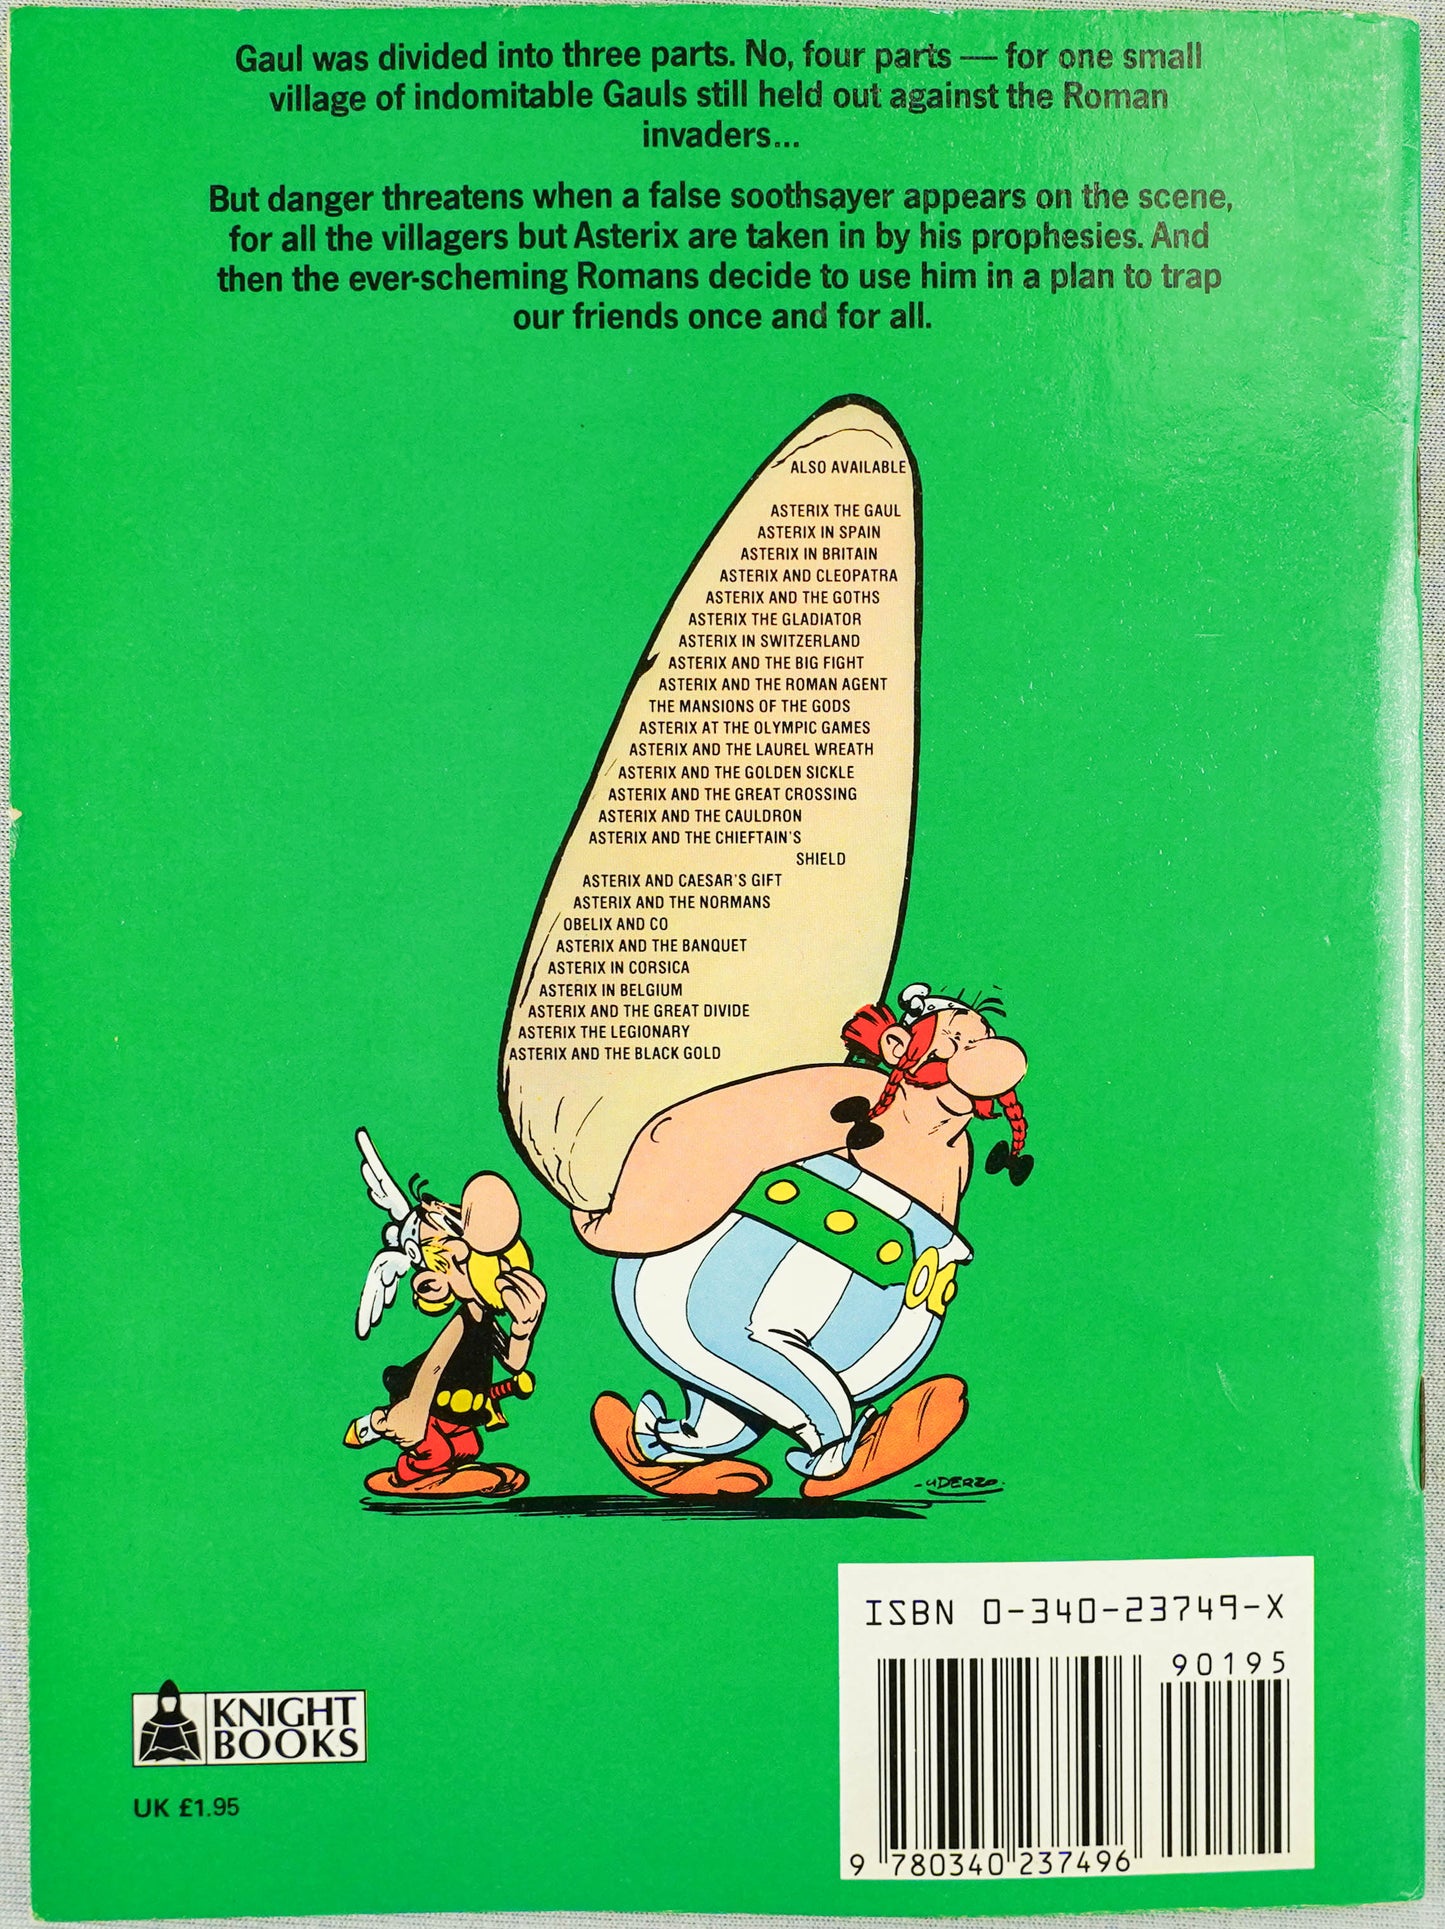 Asterix The Soothsayer Vintage Mini A5 Asterix Book UK Paperback Edition Uderzo